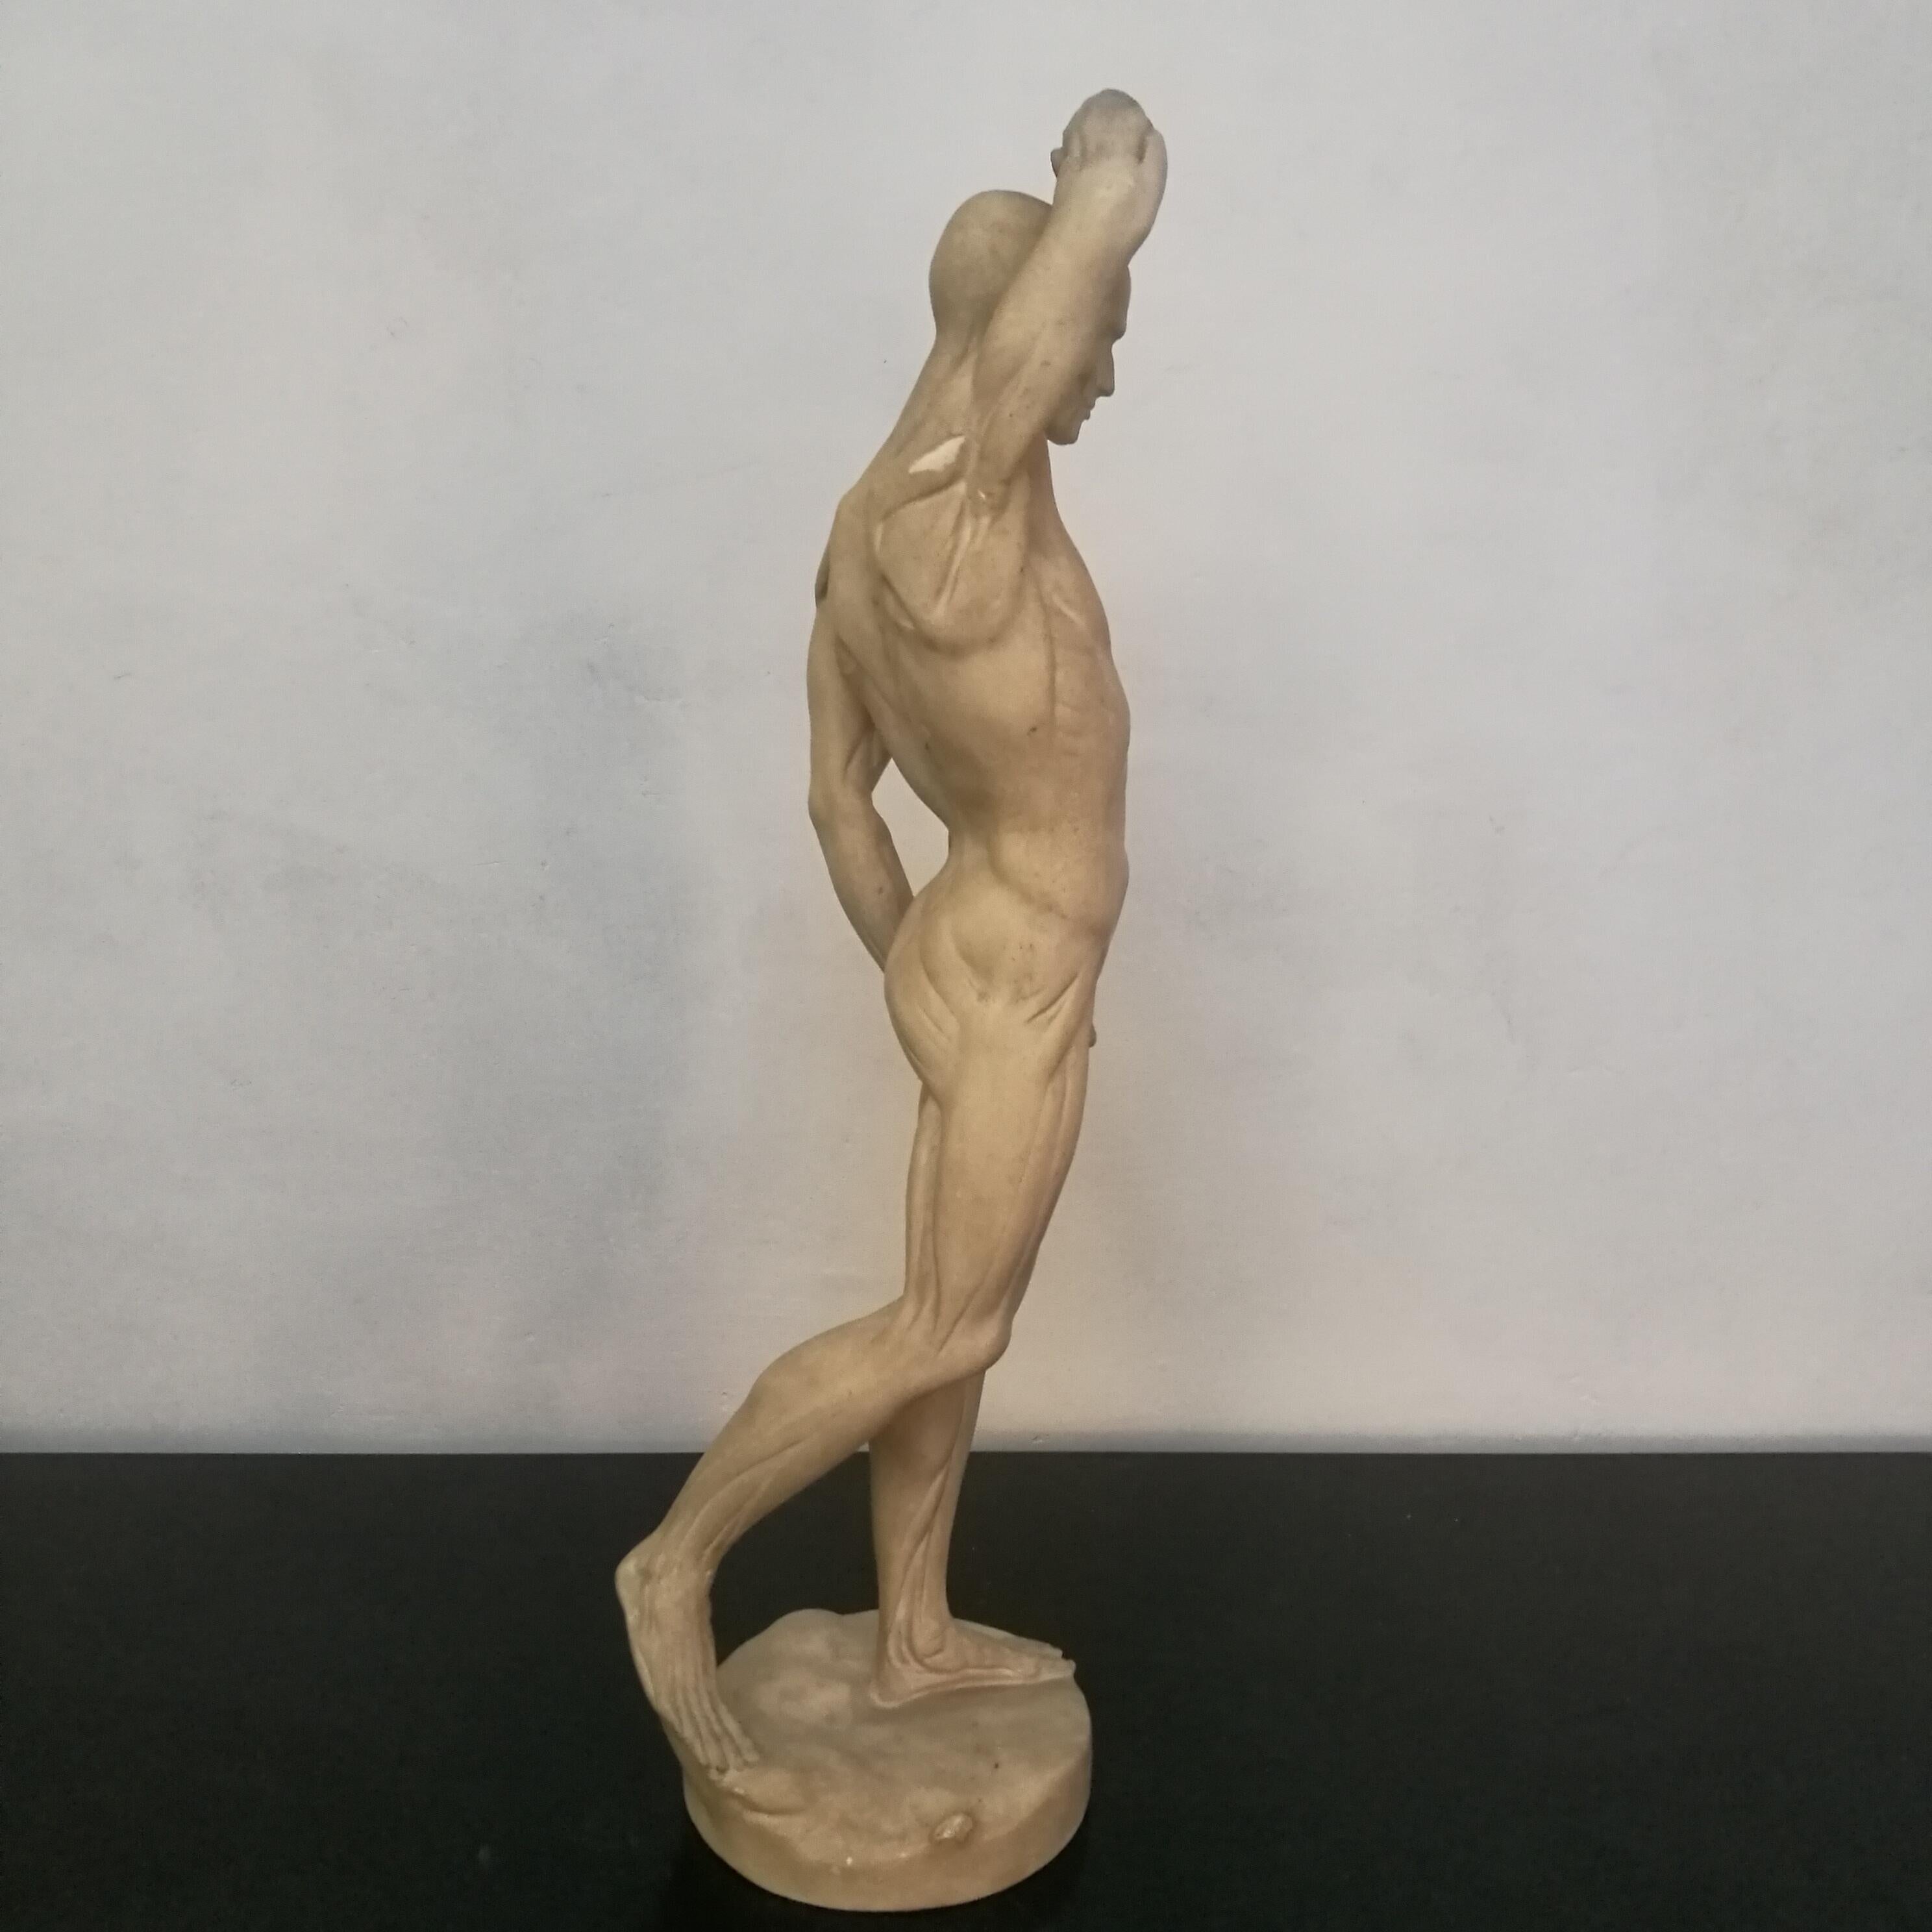 Italian plaster sculpture, Milan 1970s
Plaster sculpture of a male human body, very detailed and with a solid base, produced by an artist based in Milan.
It's like having a small monument at home.